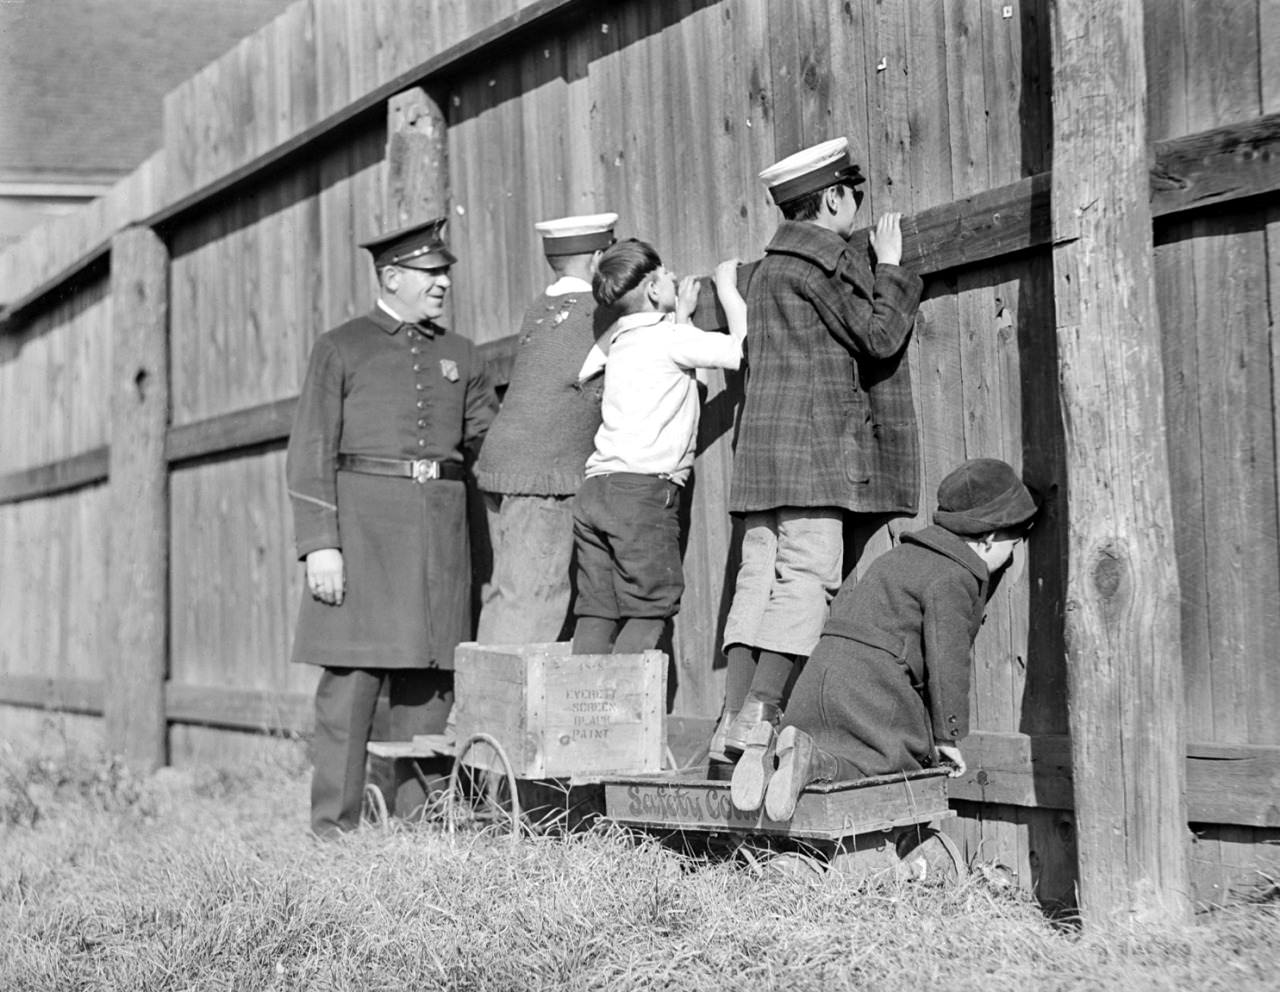 Cop joins baseball peekers at the fence in Massachusetts, 1930